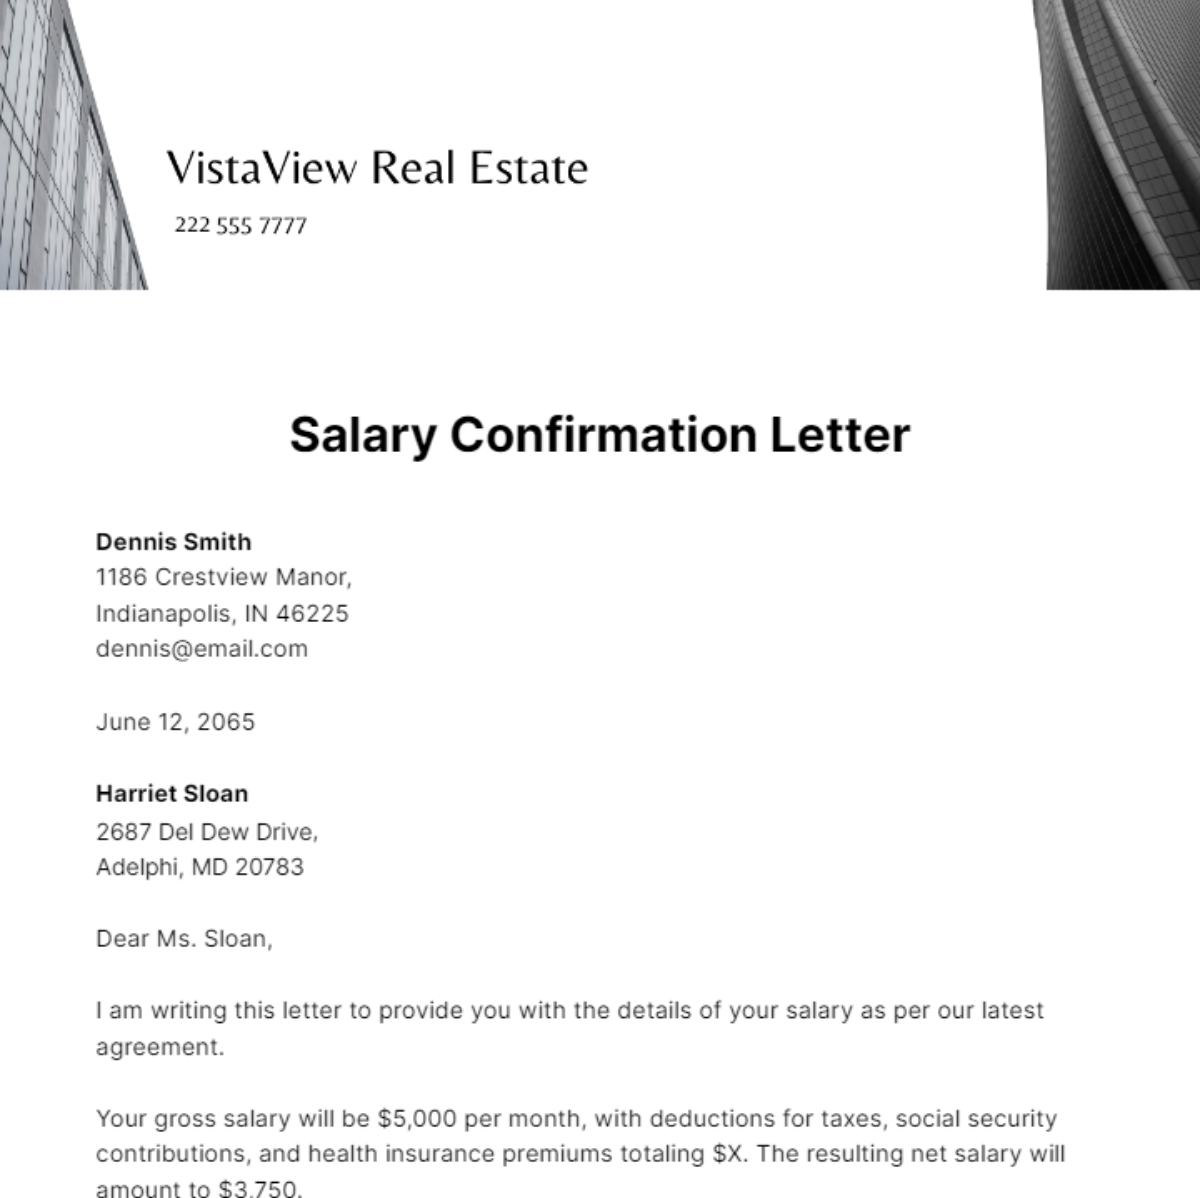 Salary Confirmation Letter Template